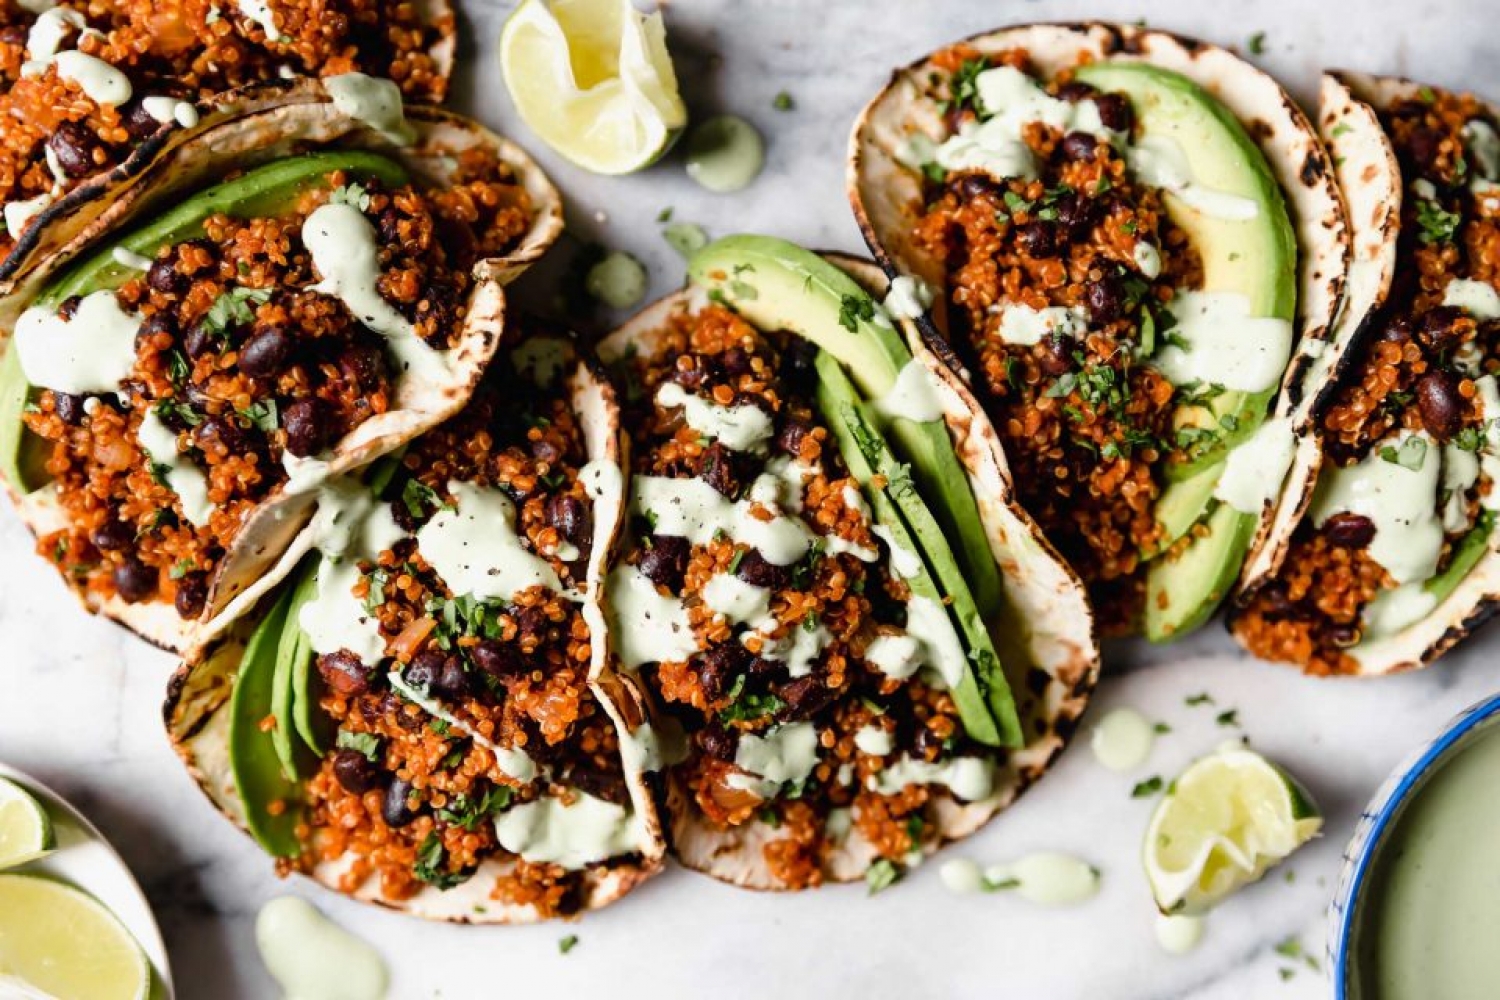 <p>Beans make a wonderful vegetarian taco filling, and in <a href="https://playswellwithbutter.com/quinoa-black-bean-tacos/" rel="noopener">this protein-packed recipe</a>, they're combined with quinoa and drizzled with a delicious cilantro lime cashew crema for the ultimate satisfying meal.</p>